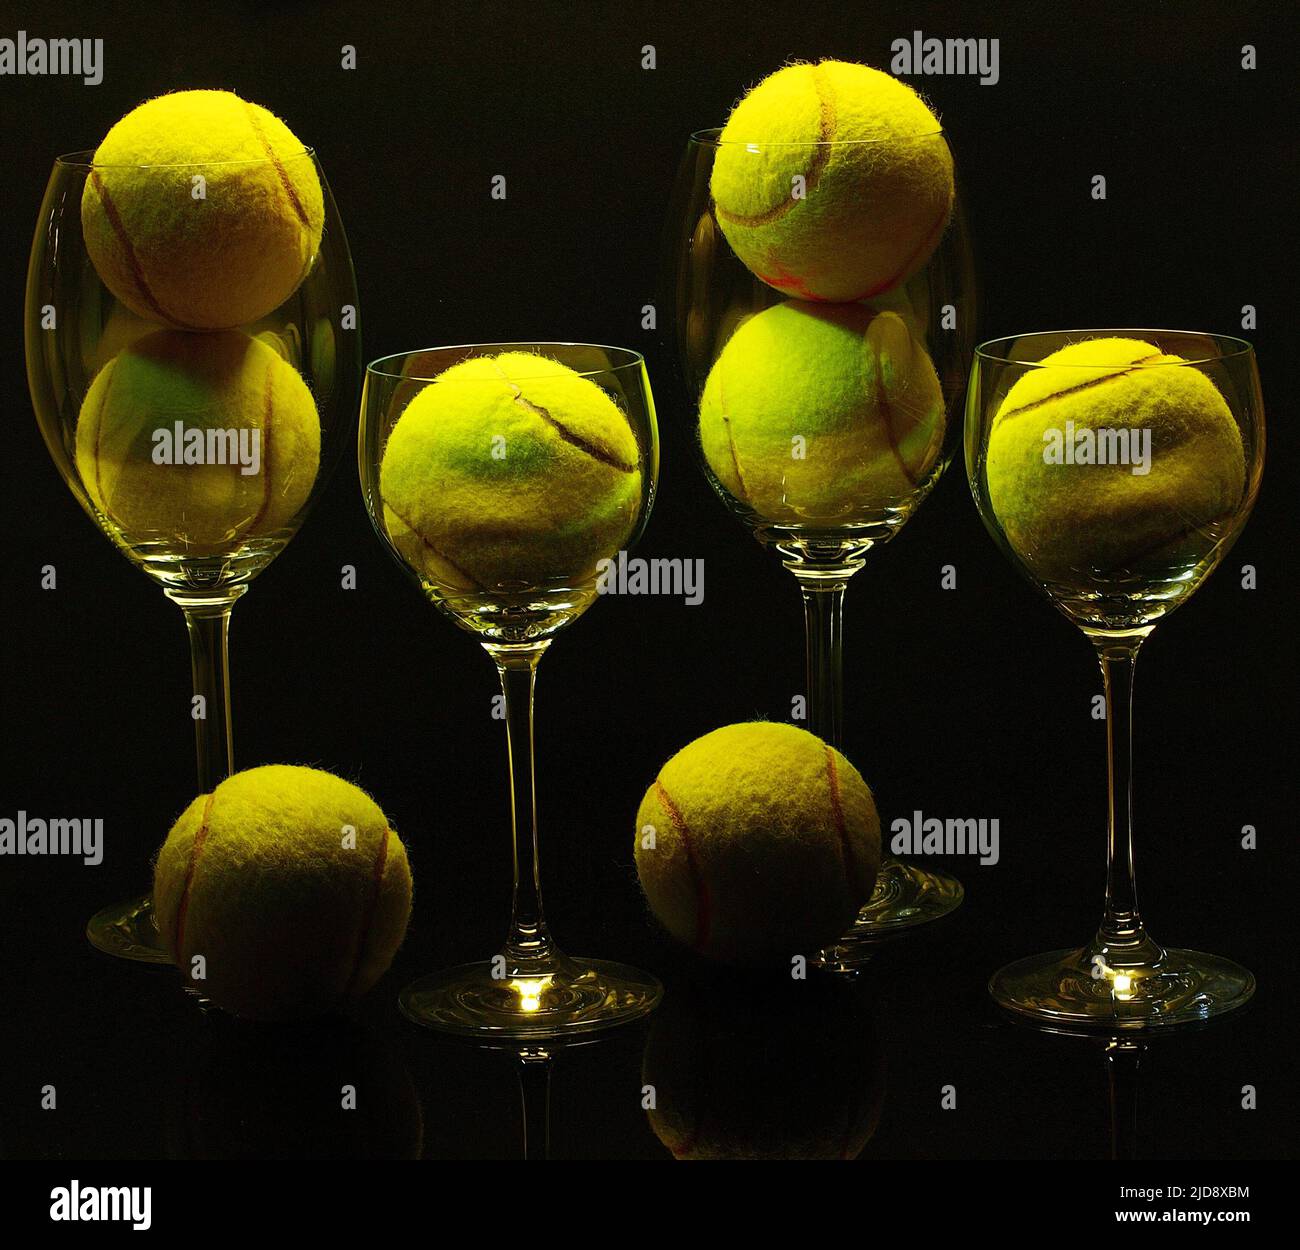 Tennis ball and wine glass in a black background, illuminated from above in a long exposure shot. Stock Photo